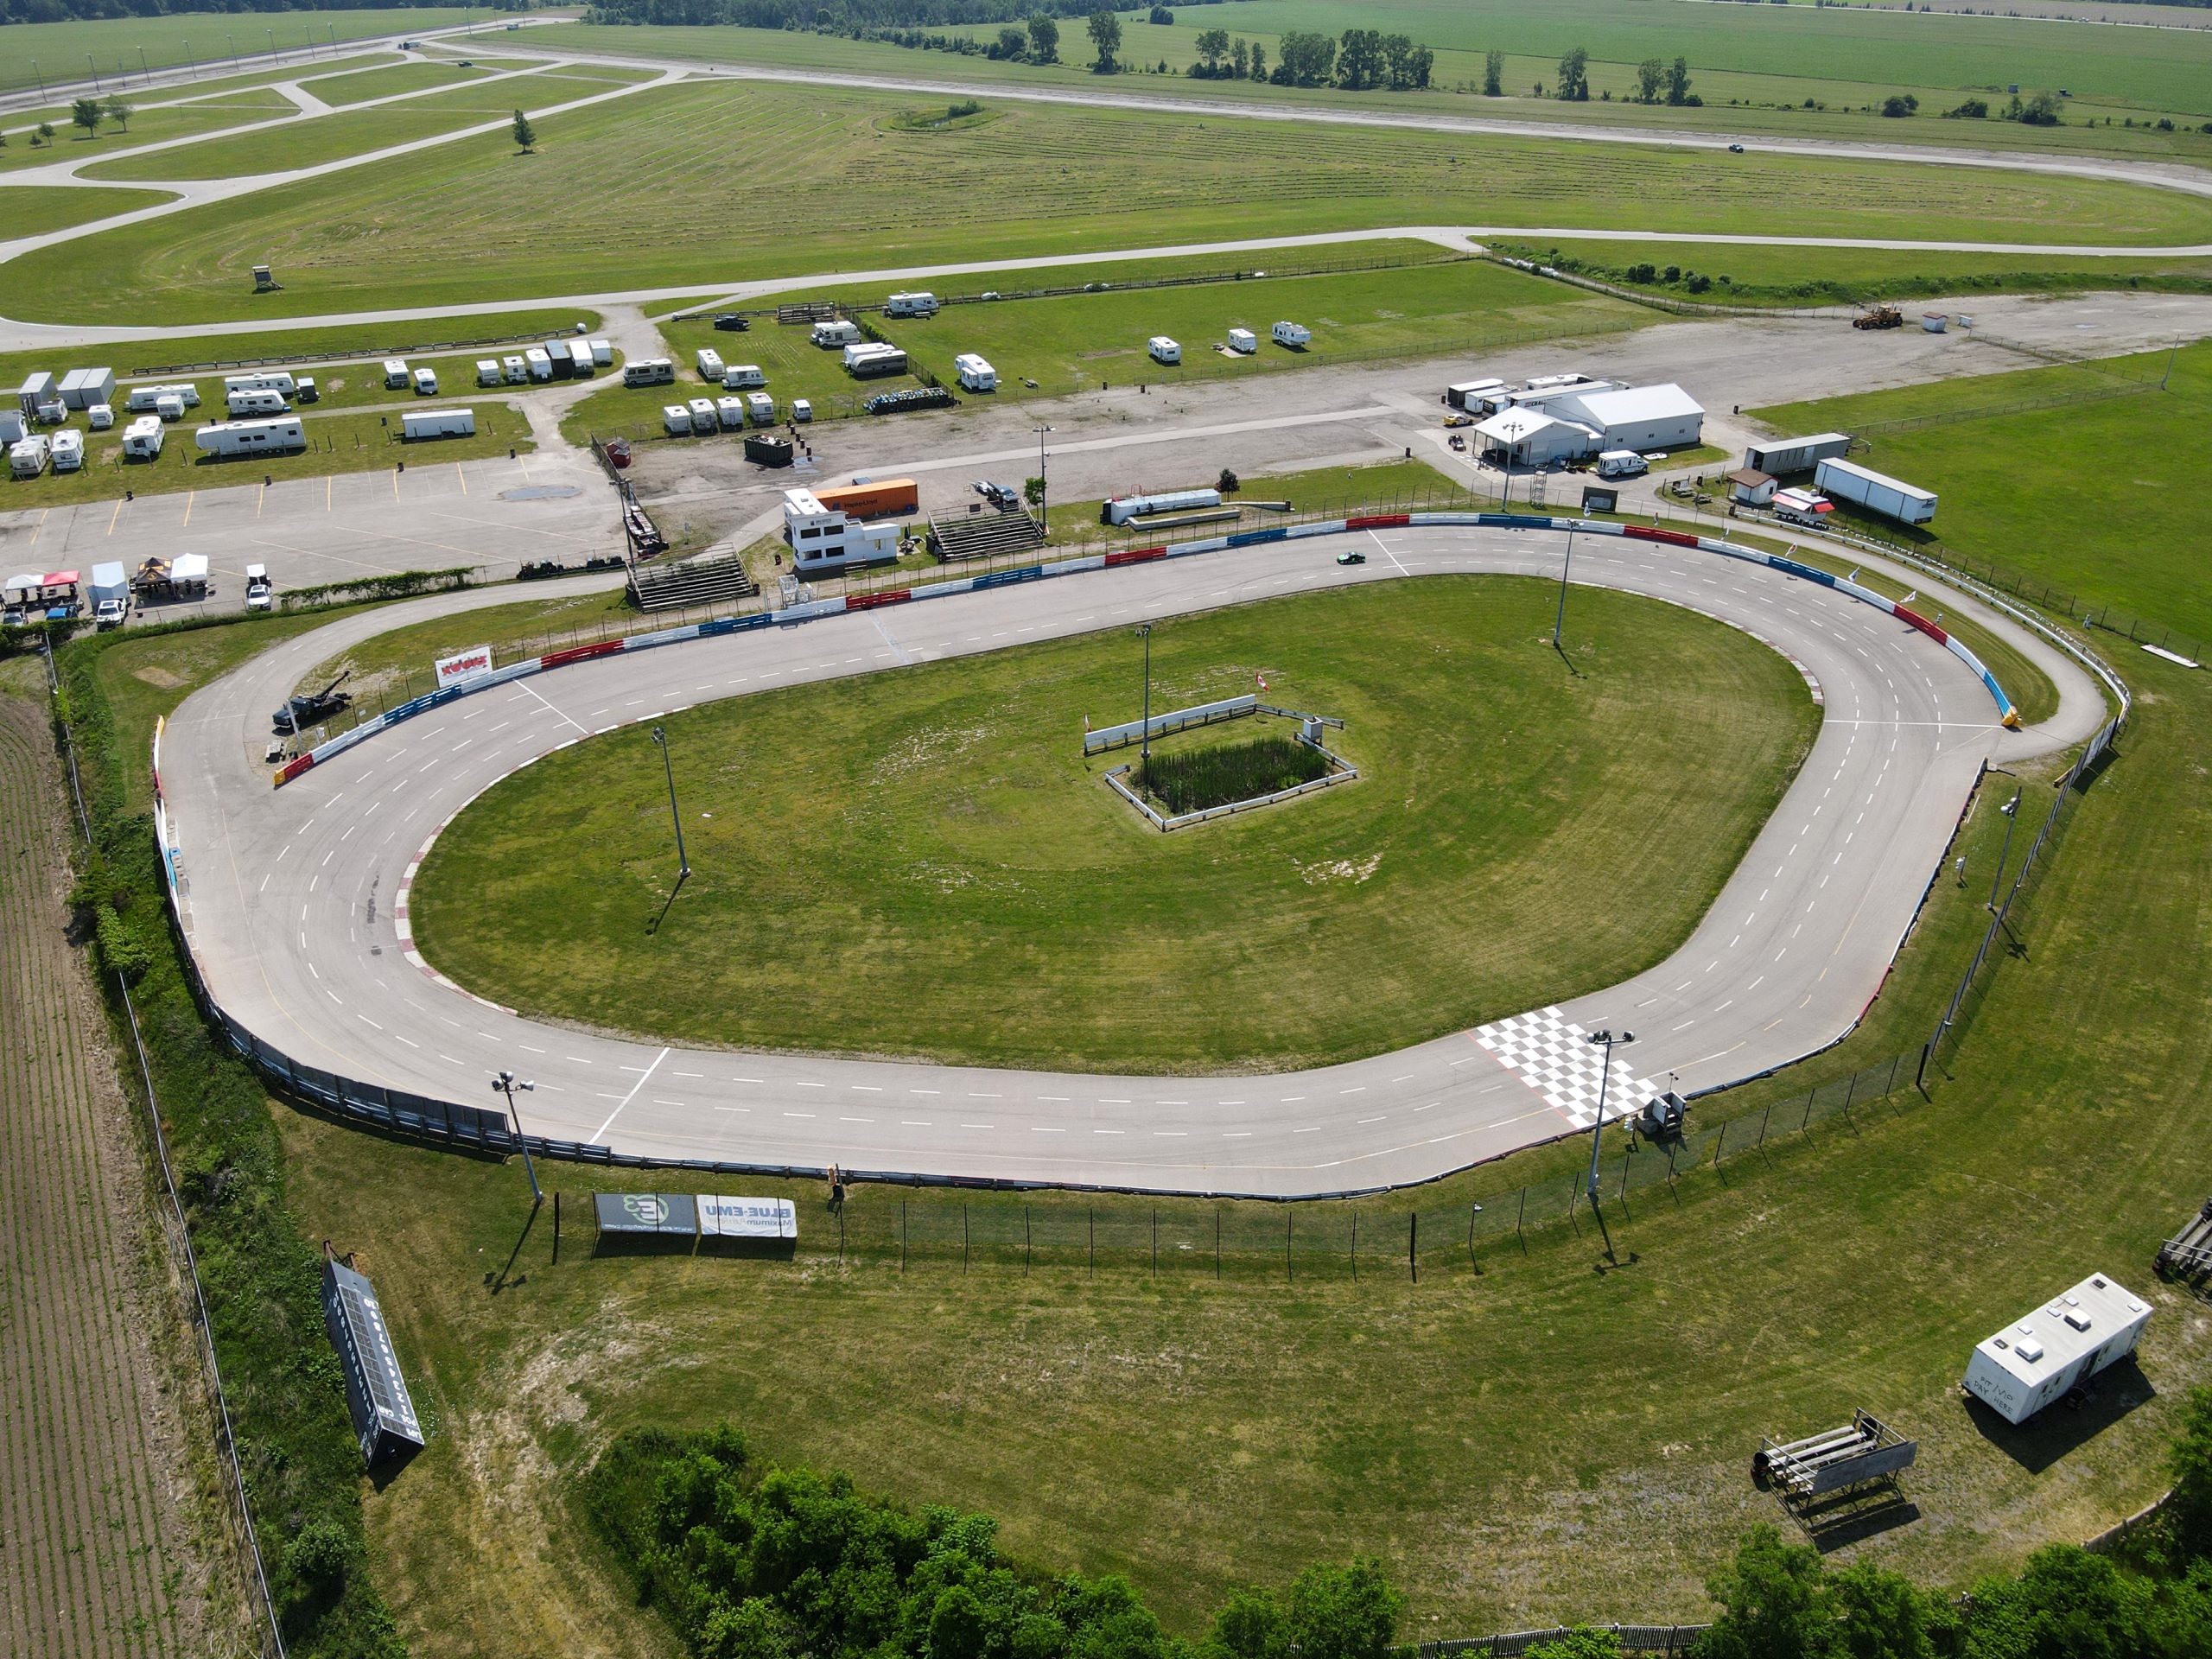 Aerial view of the track.